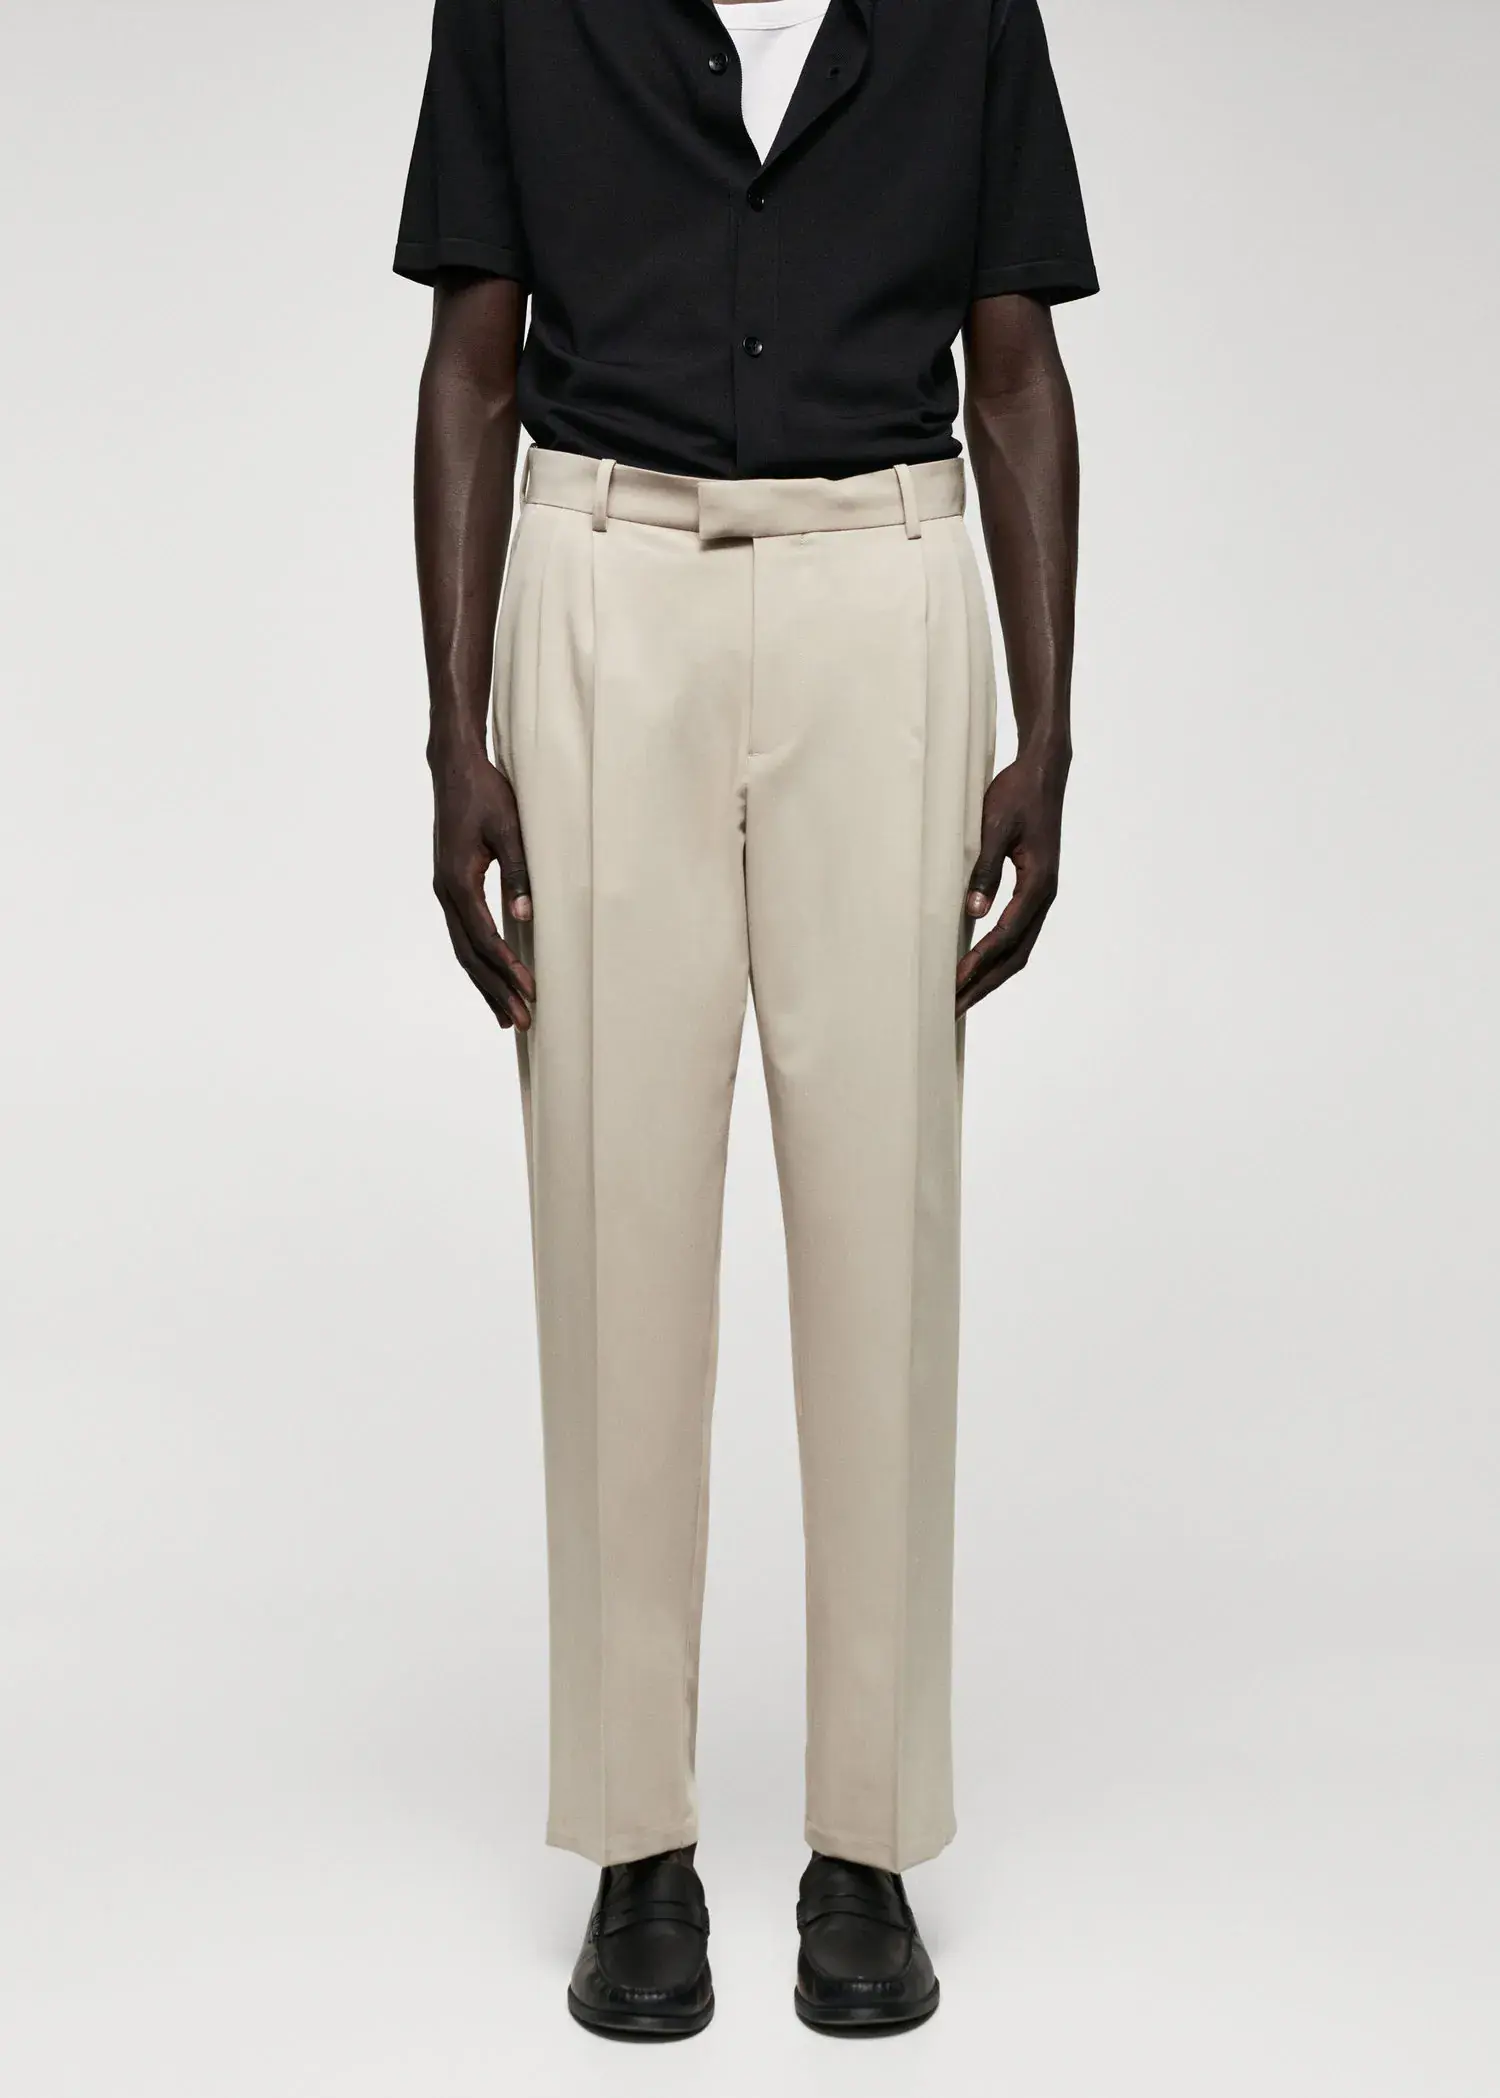 Mango Regular-fit suit pants with pleats. a man in a black shirt and beige pants. 